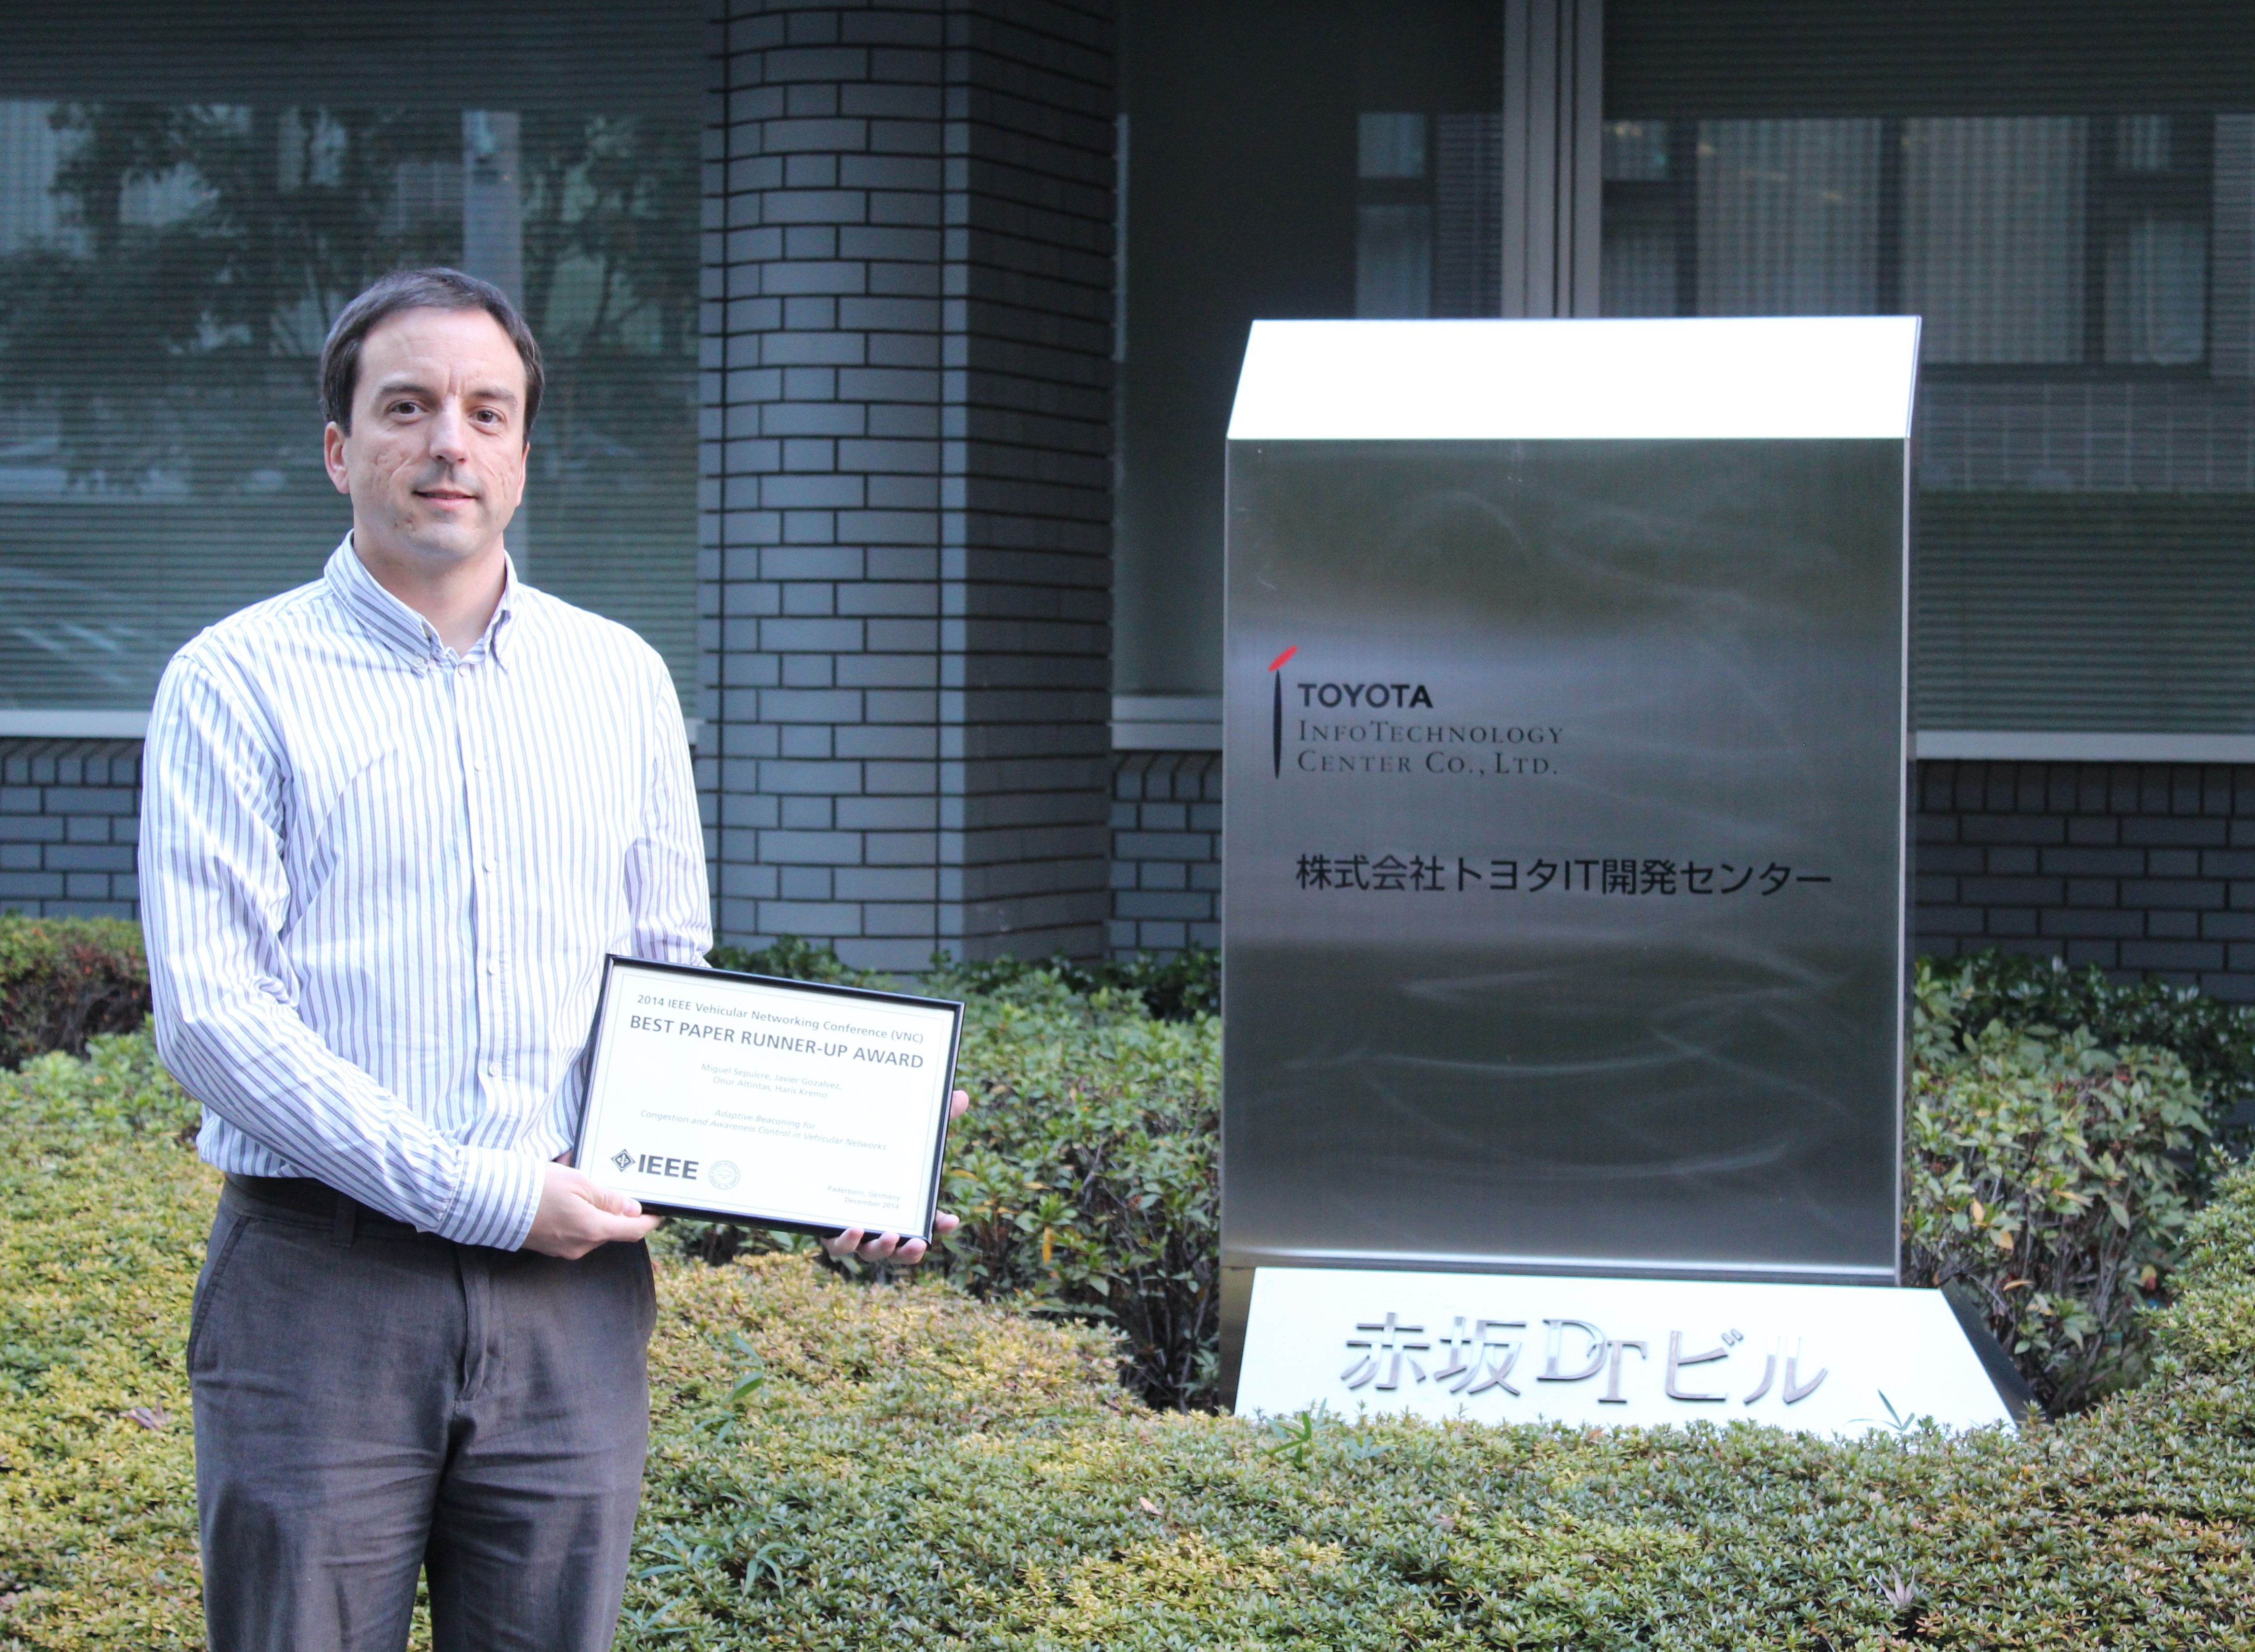 Best full paper runner-up in IEEE Vehicular Networking Conference 2014